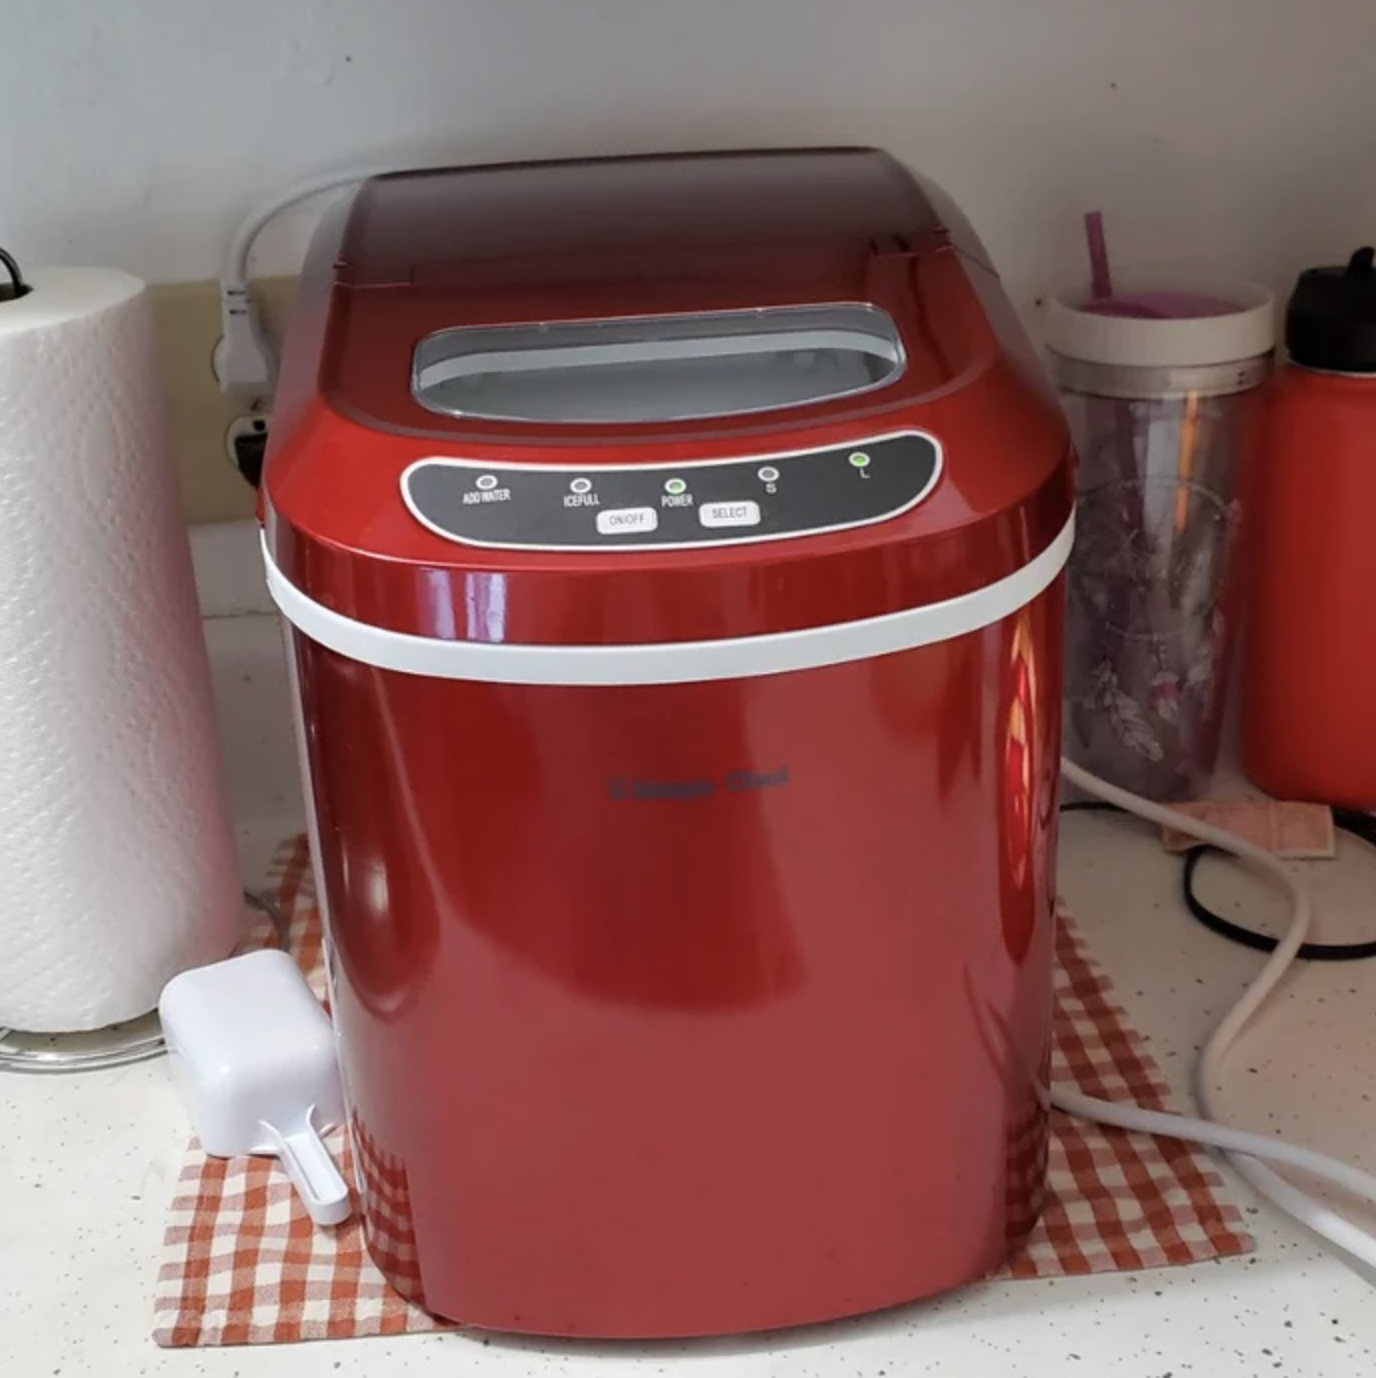 the red ice maker